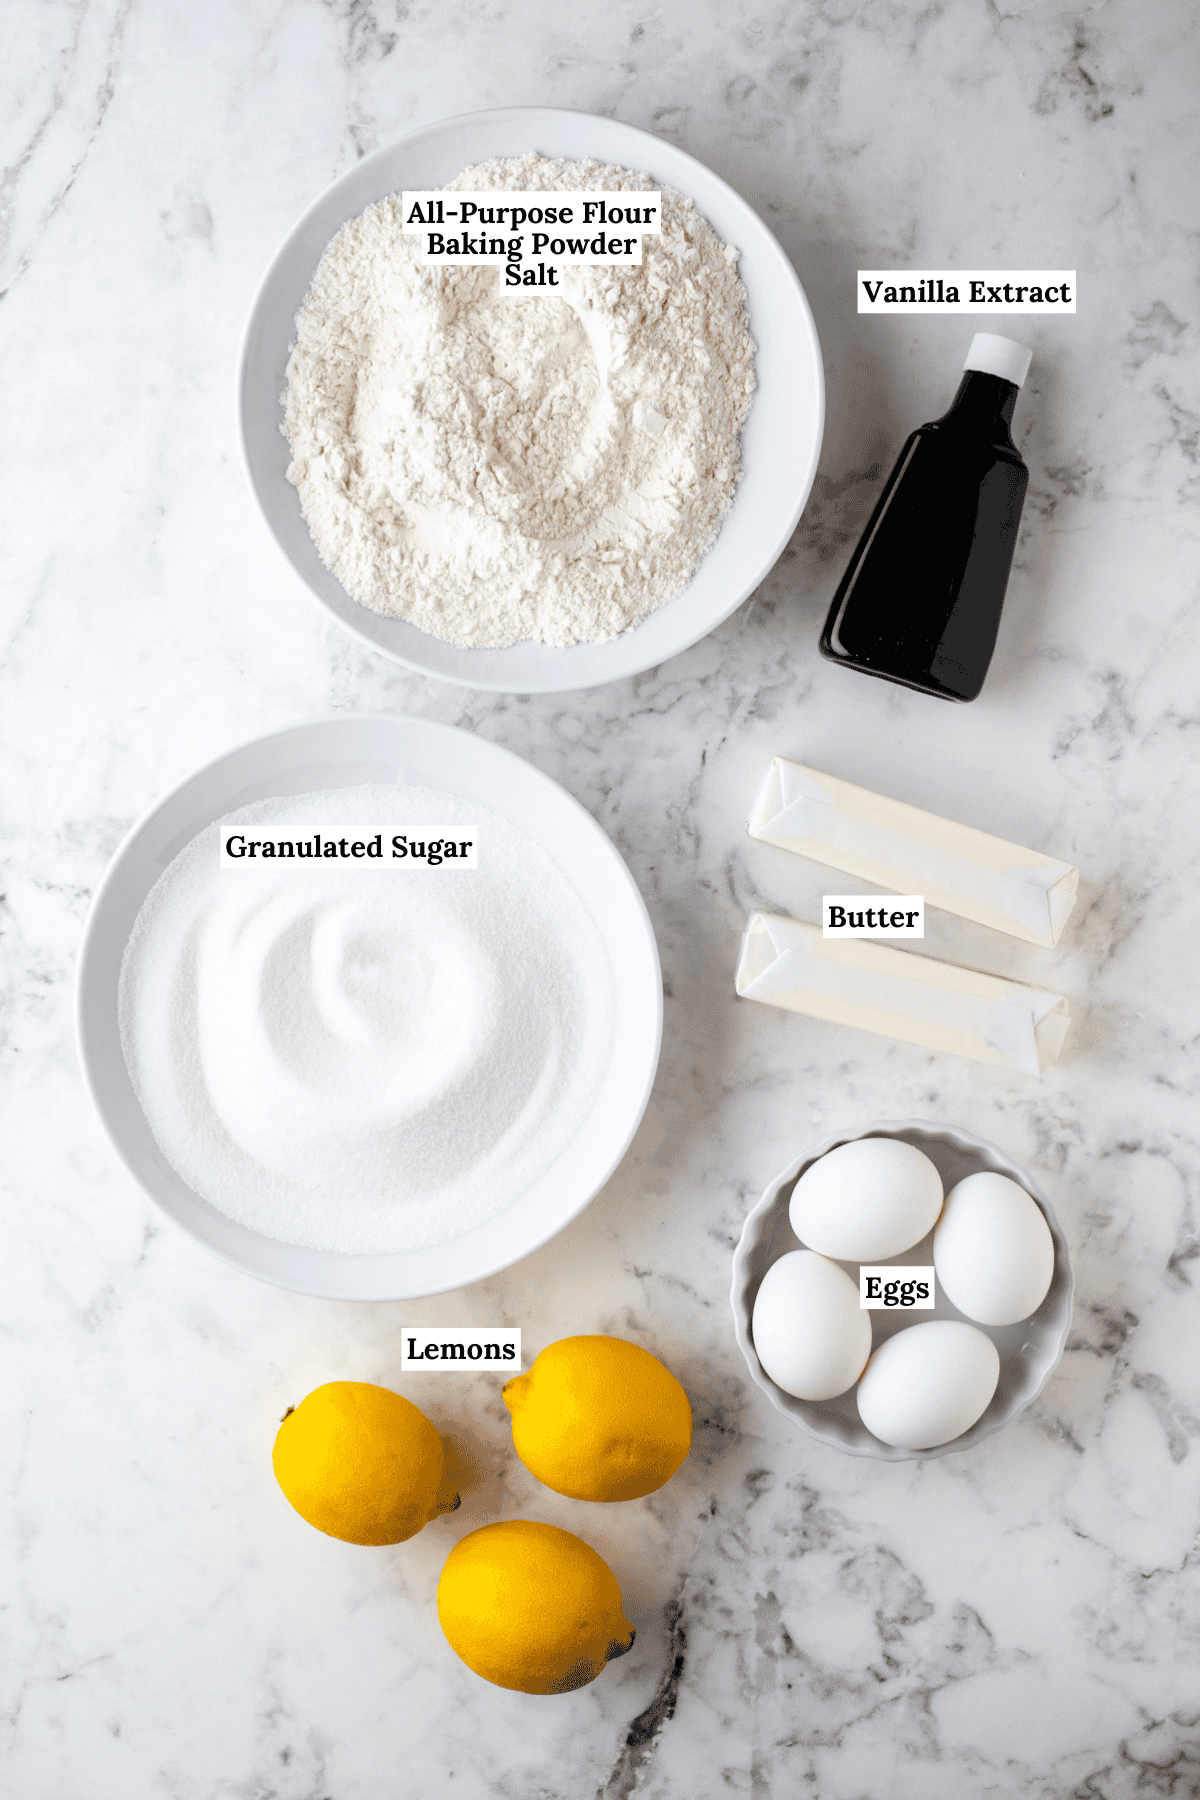 over head view of ingredients for lemon pound cake on a counter top including three whole lemons, 4 eggs, two sticks of butter, a bowl of granulated sugar, a bottle of vanilla extract, and a bowl of all-purpose flour, baking powder and salt